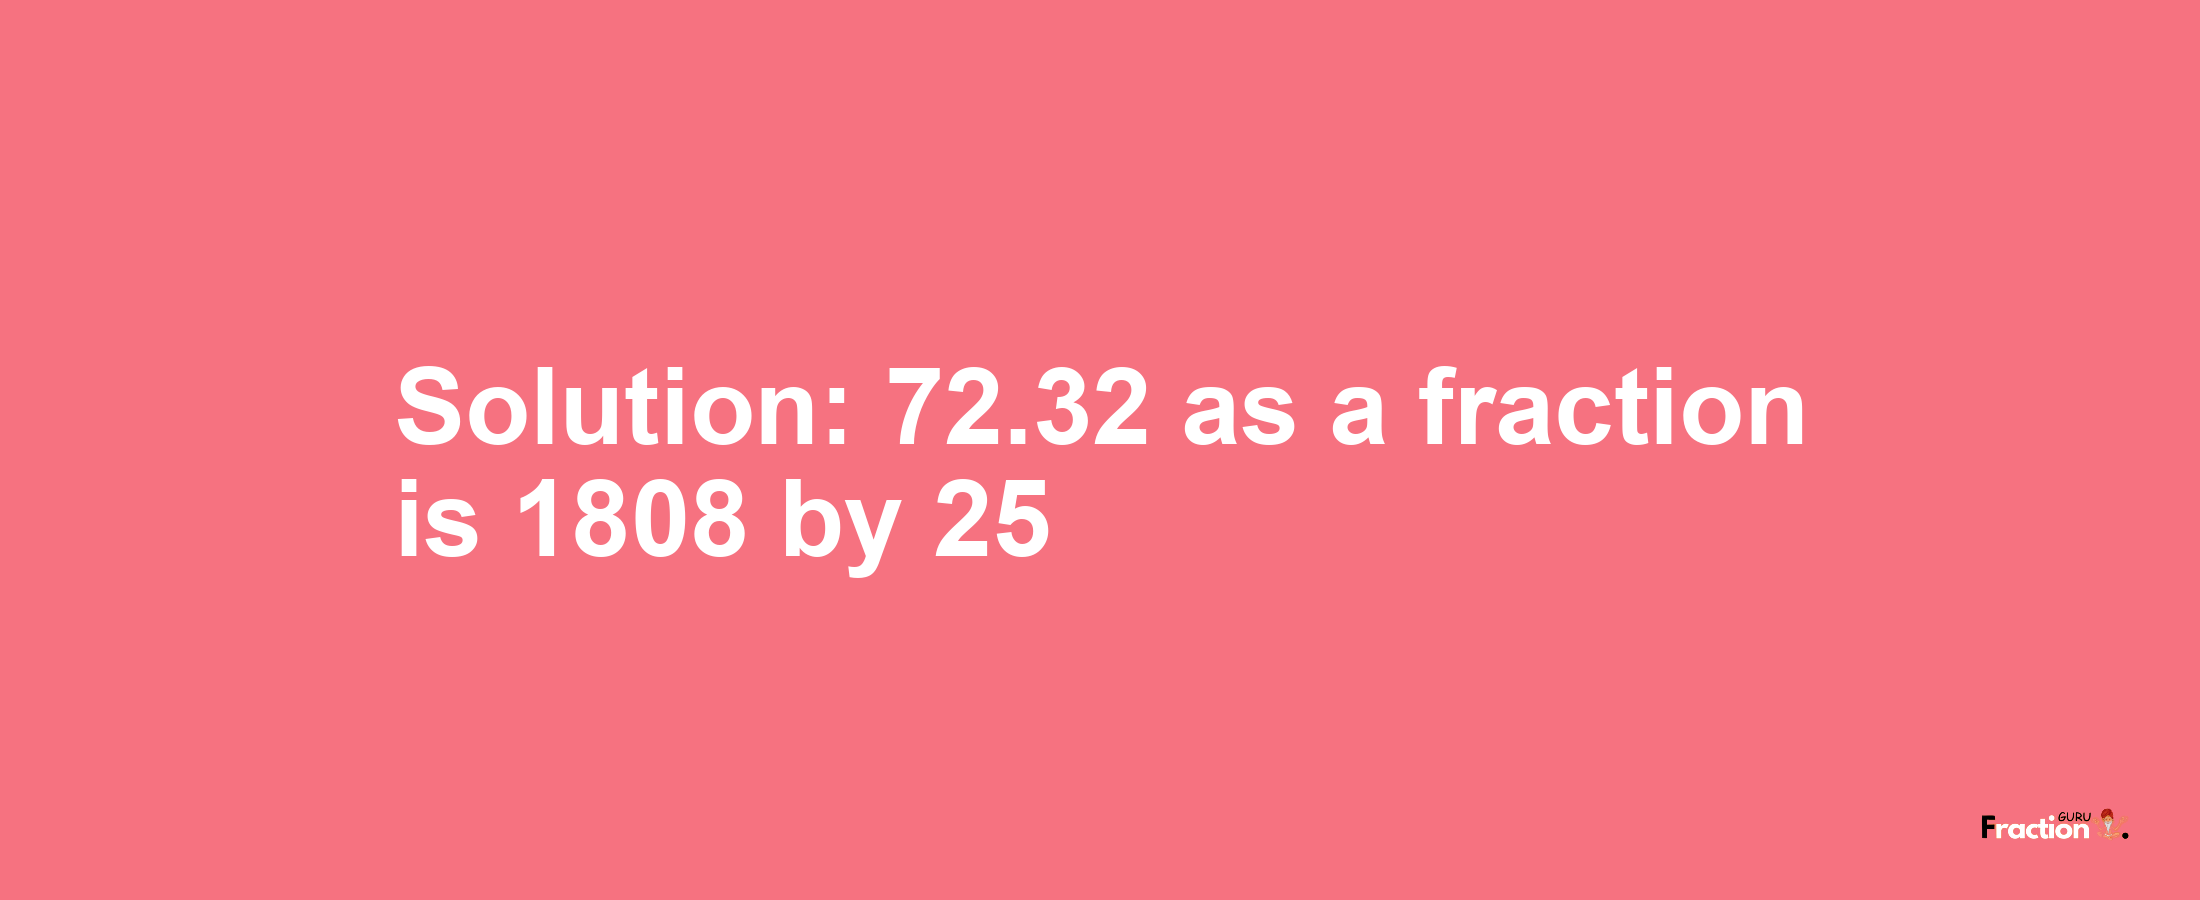 Solution:72.32 as a fraction is 1808/25